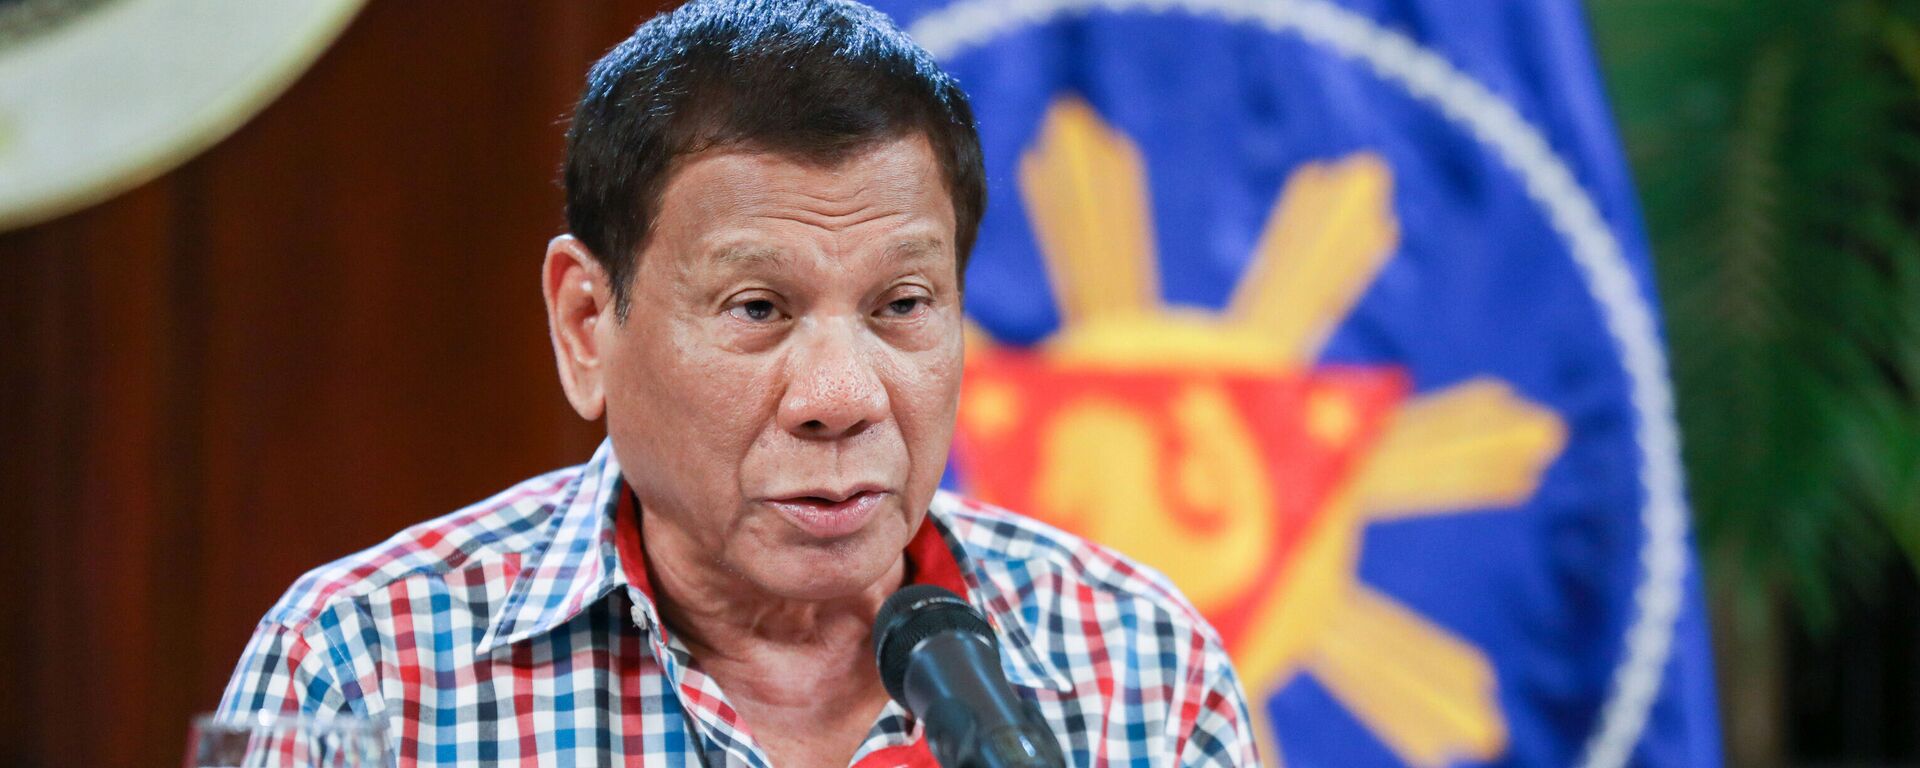 In this April 16, 2020, photo provided by the Malacanang Presidential Photographers Division, Philippine President Rodrigo Duterte speaks to the nation about the government's efforts to prevent the spread of the coronavirus that causes the COVID-19 disease during a televised address from Malacanang palace in Manila, Philippines - Sputnik International, 1920, 12.10.2021